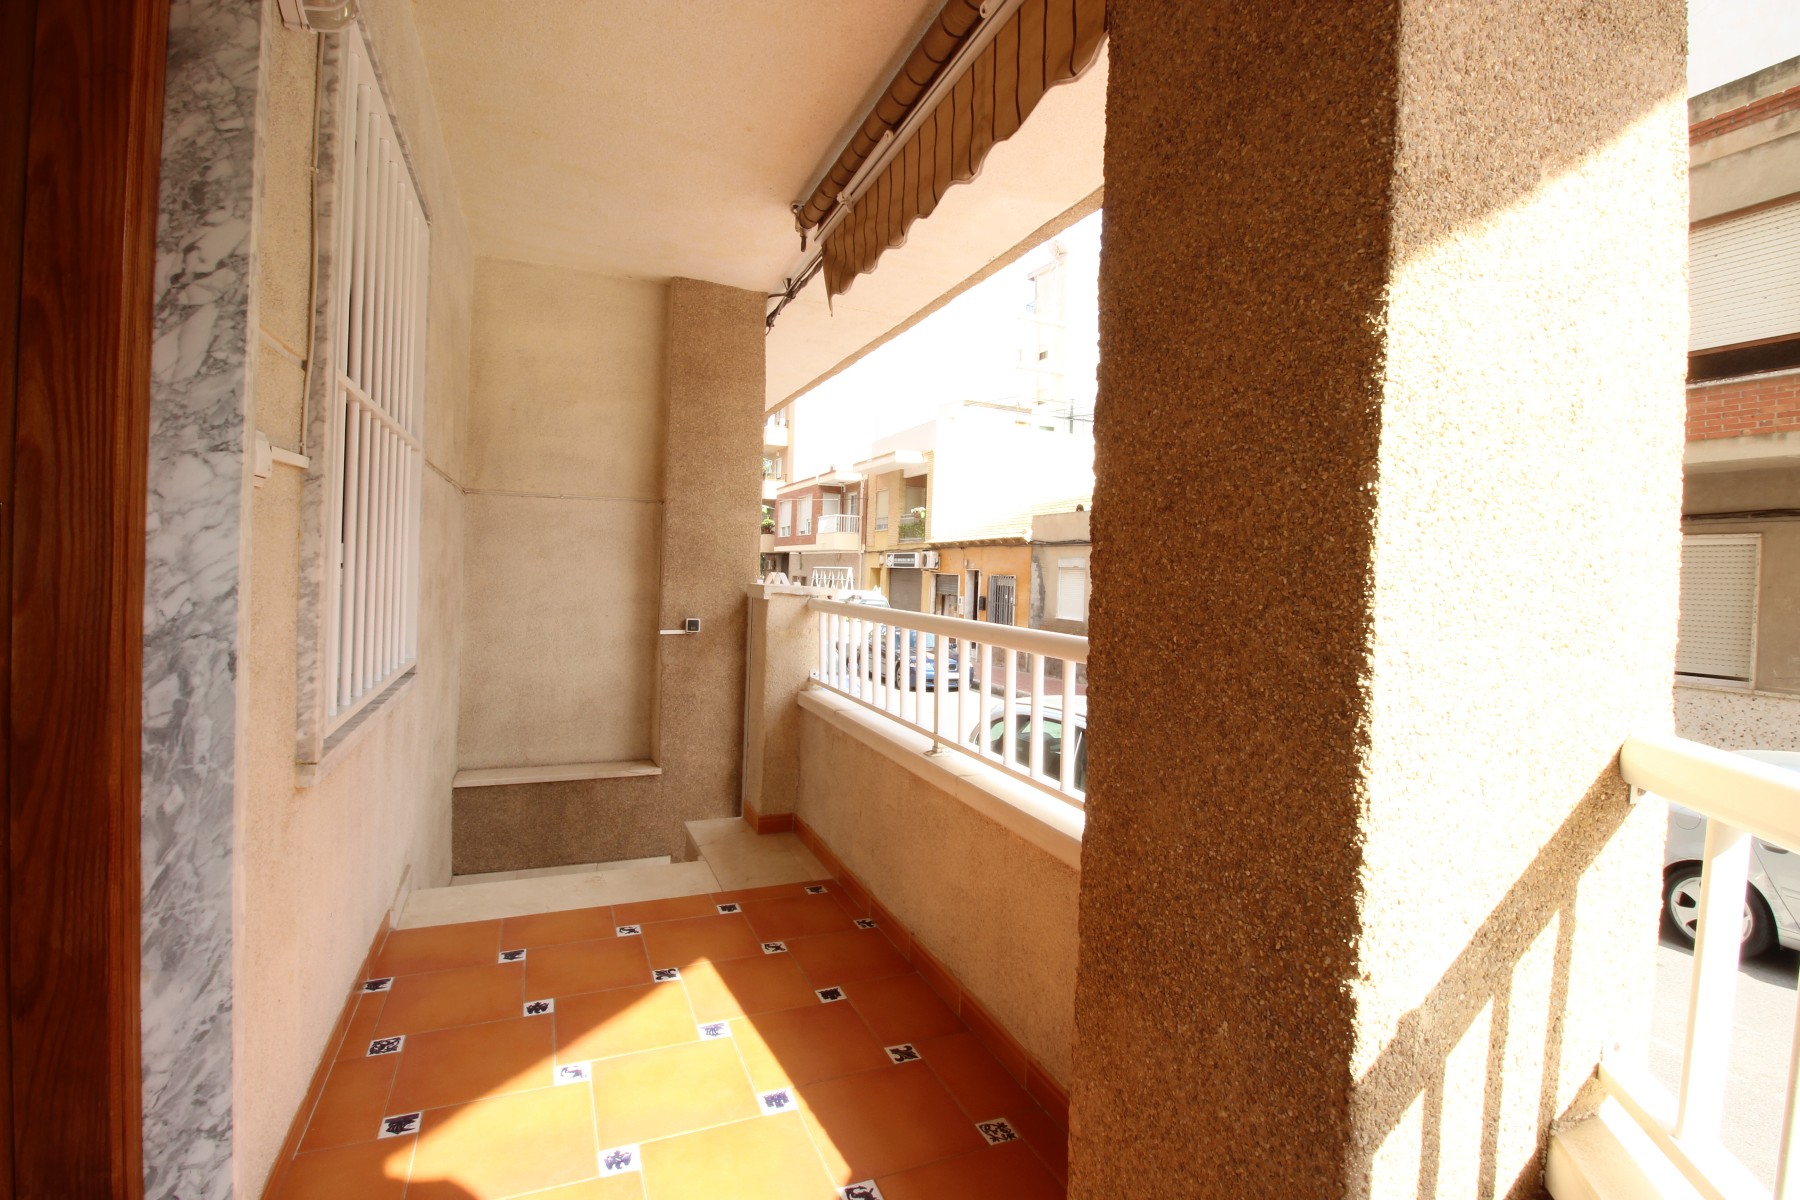 One bedroom apartment perfect for a lovely holidays in Nexus Grupo